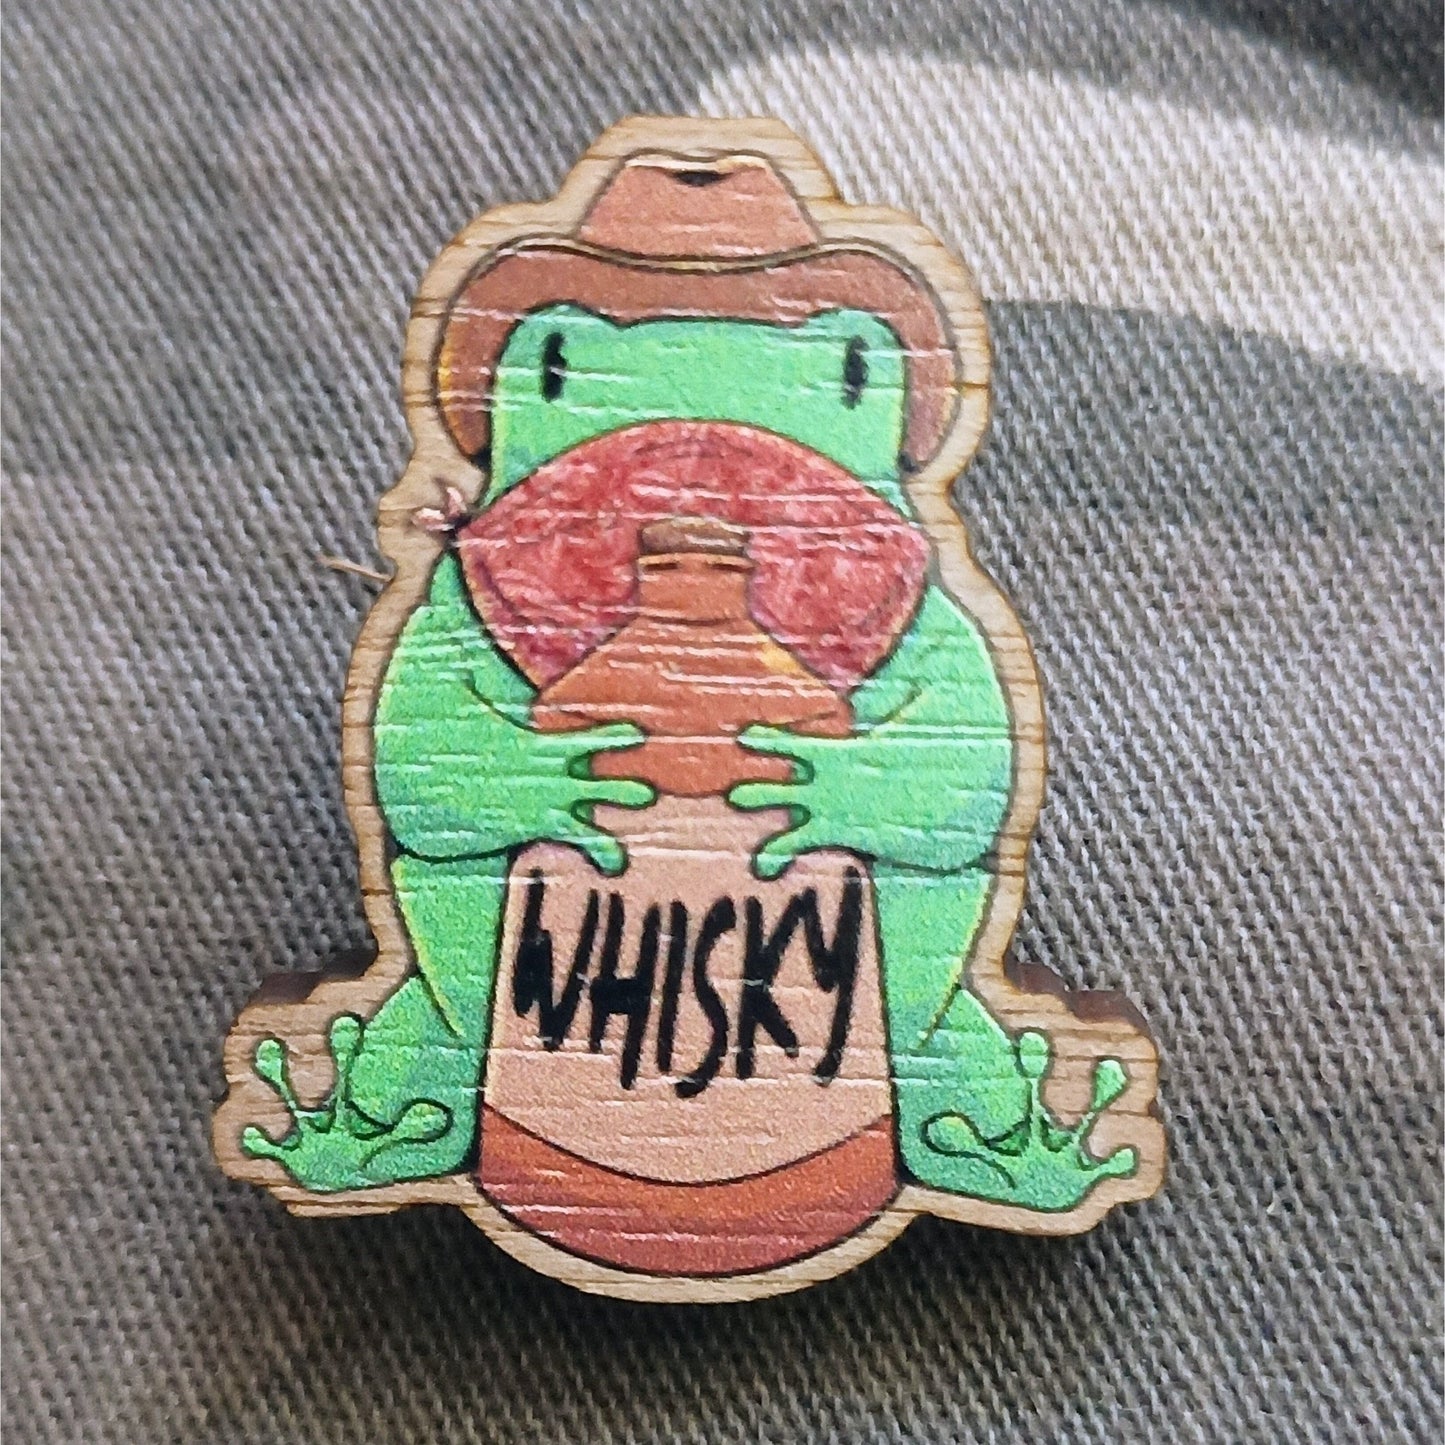 Whisky Frog | Wooden Pin 1.5" | Deviant Kreations - Deviantkreations